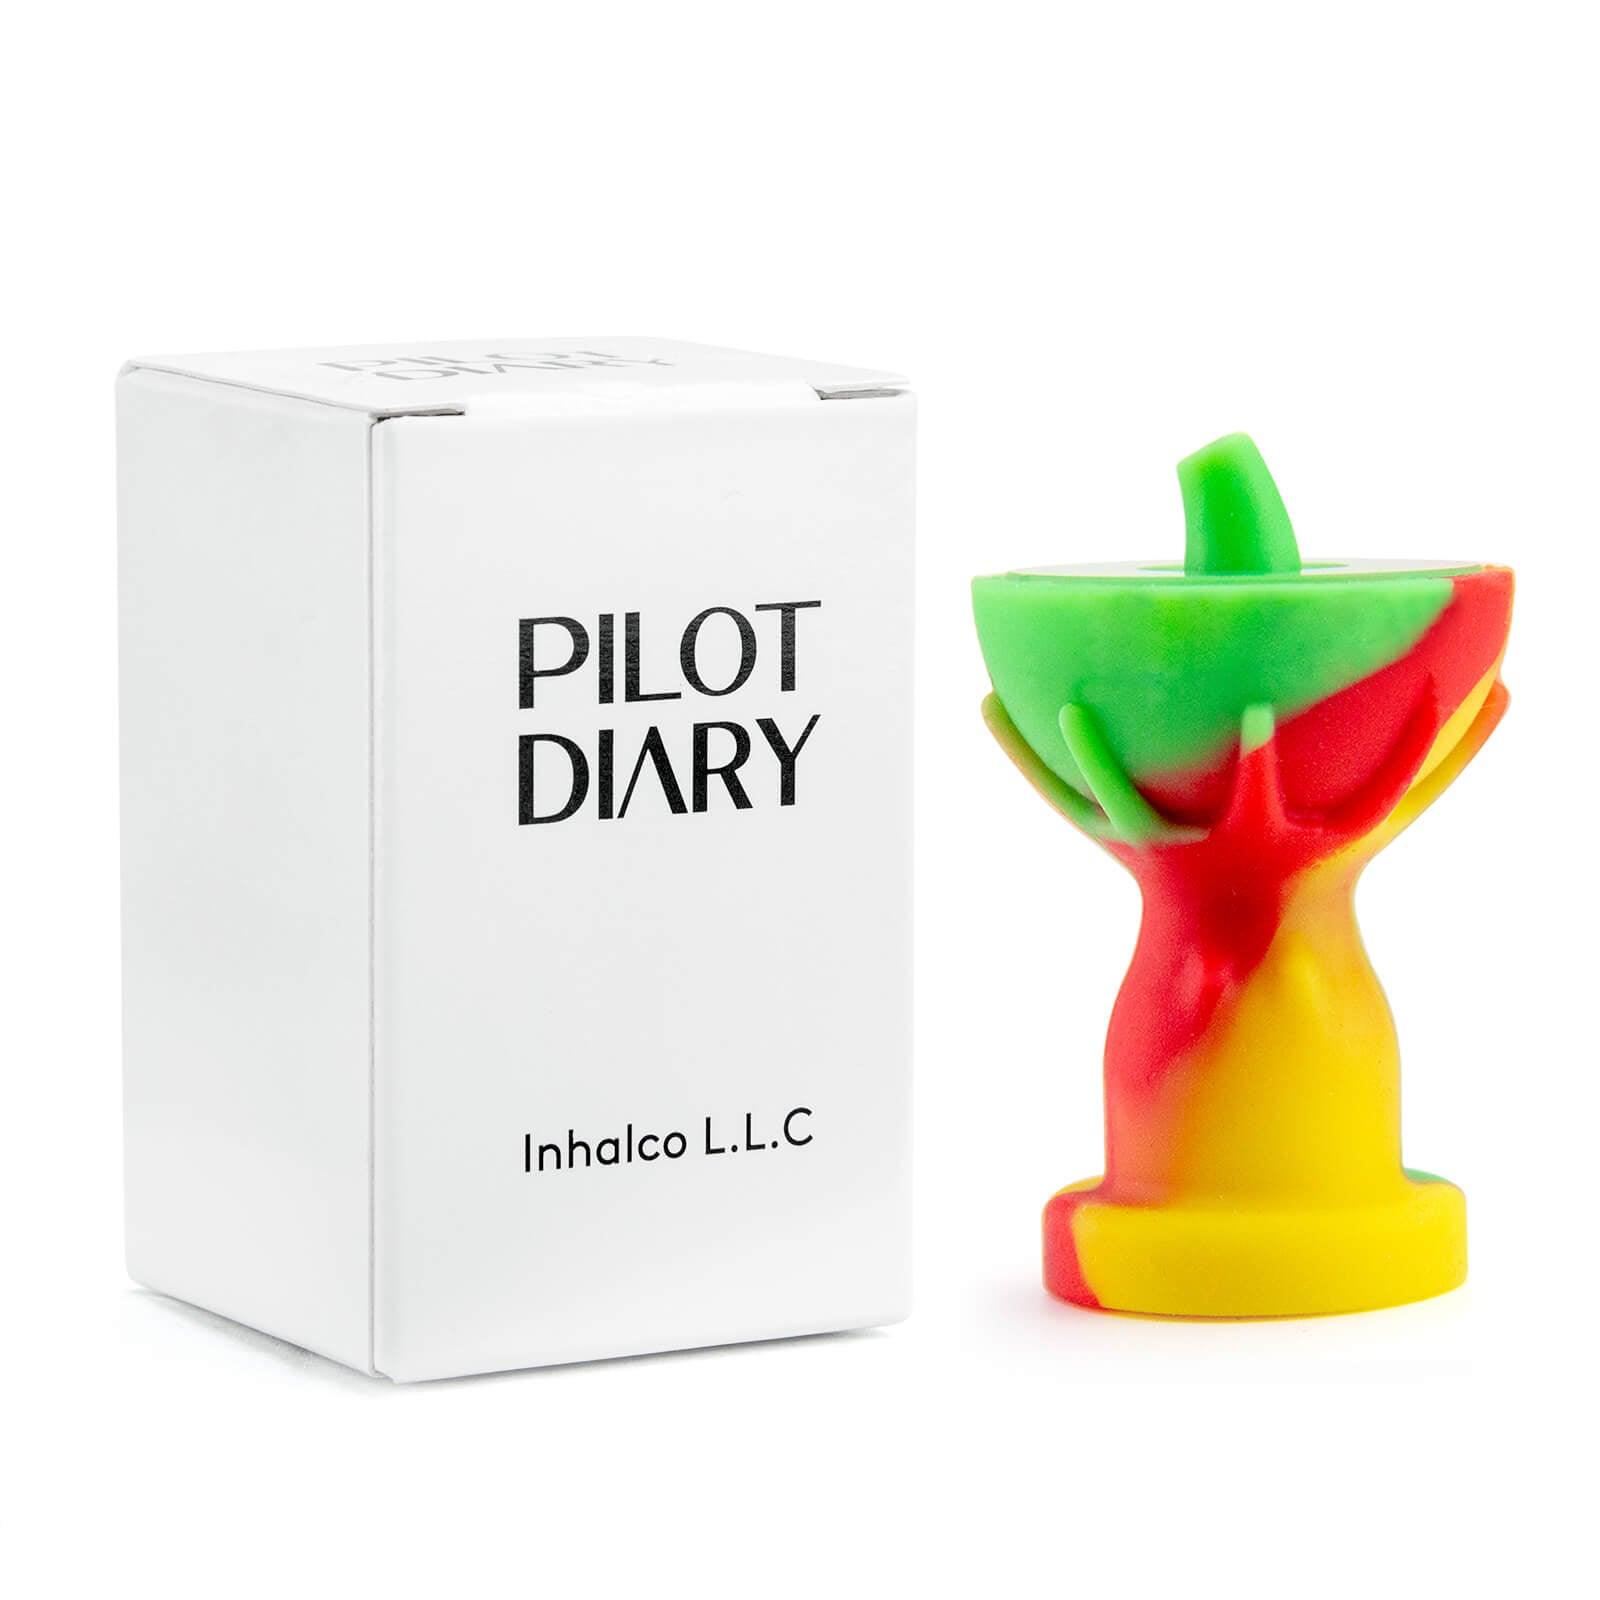 Silicone Carb Cap With Glass Bowl - PILOT DIARY